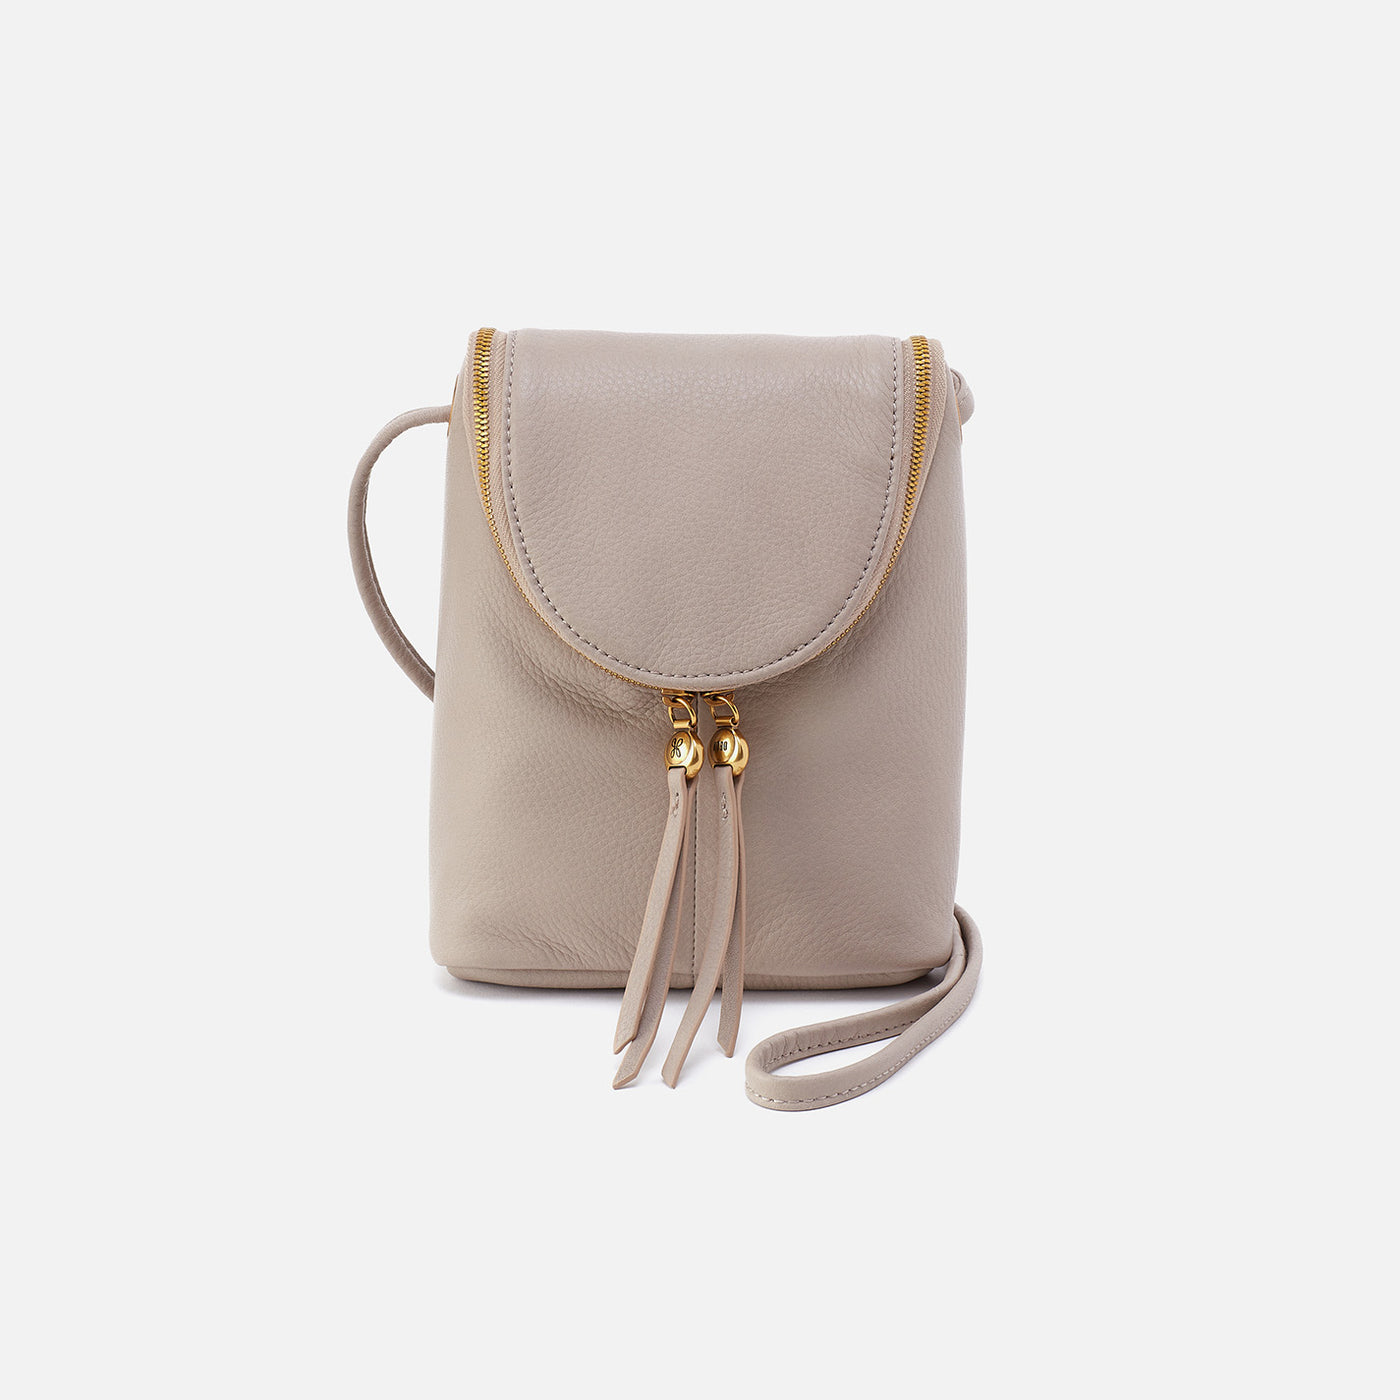 Fern Crossbody in Pebbled Leather - Taupe